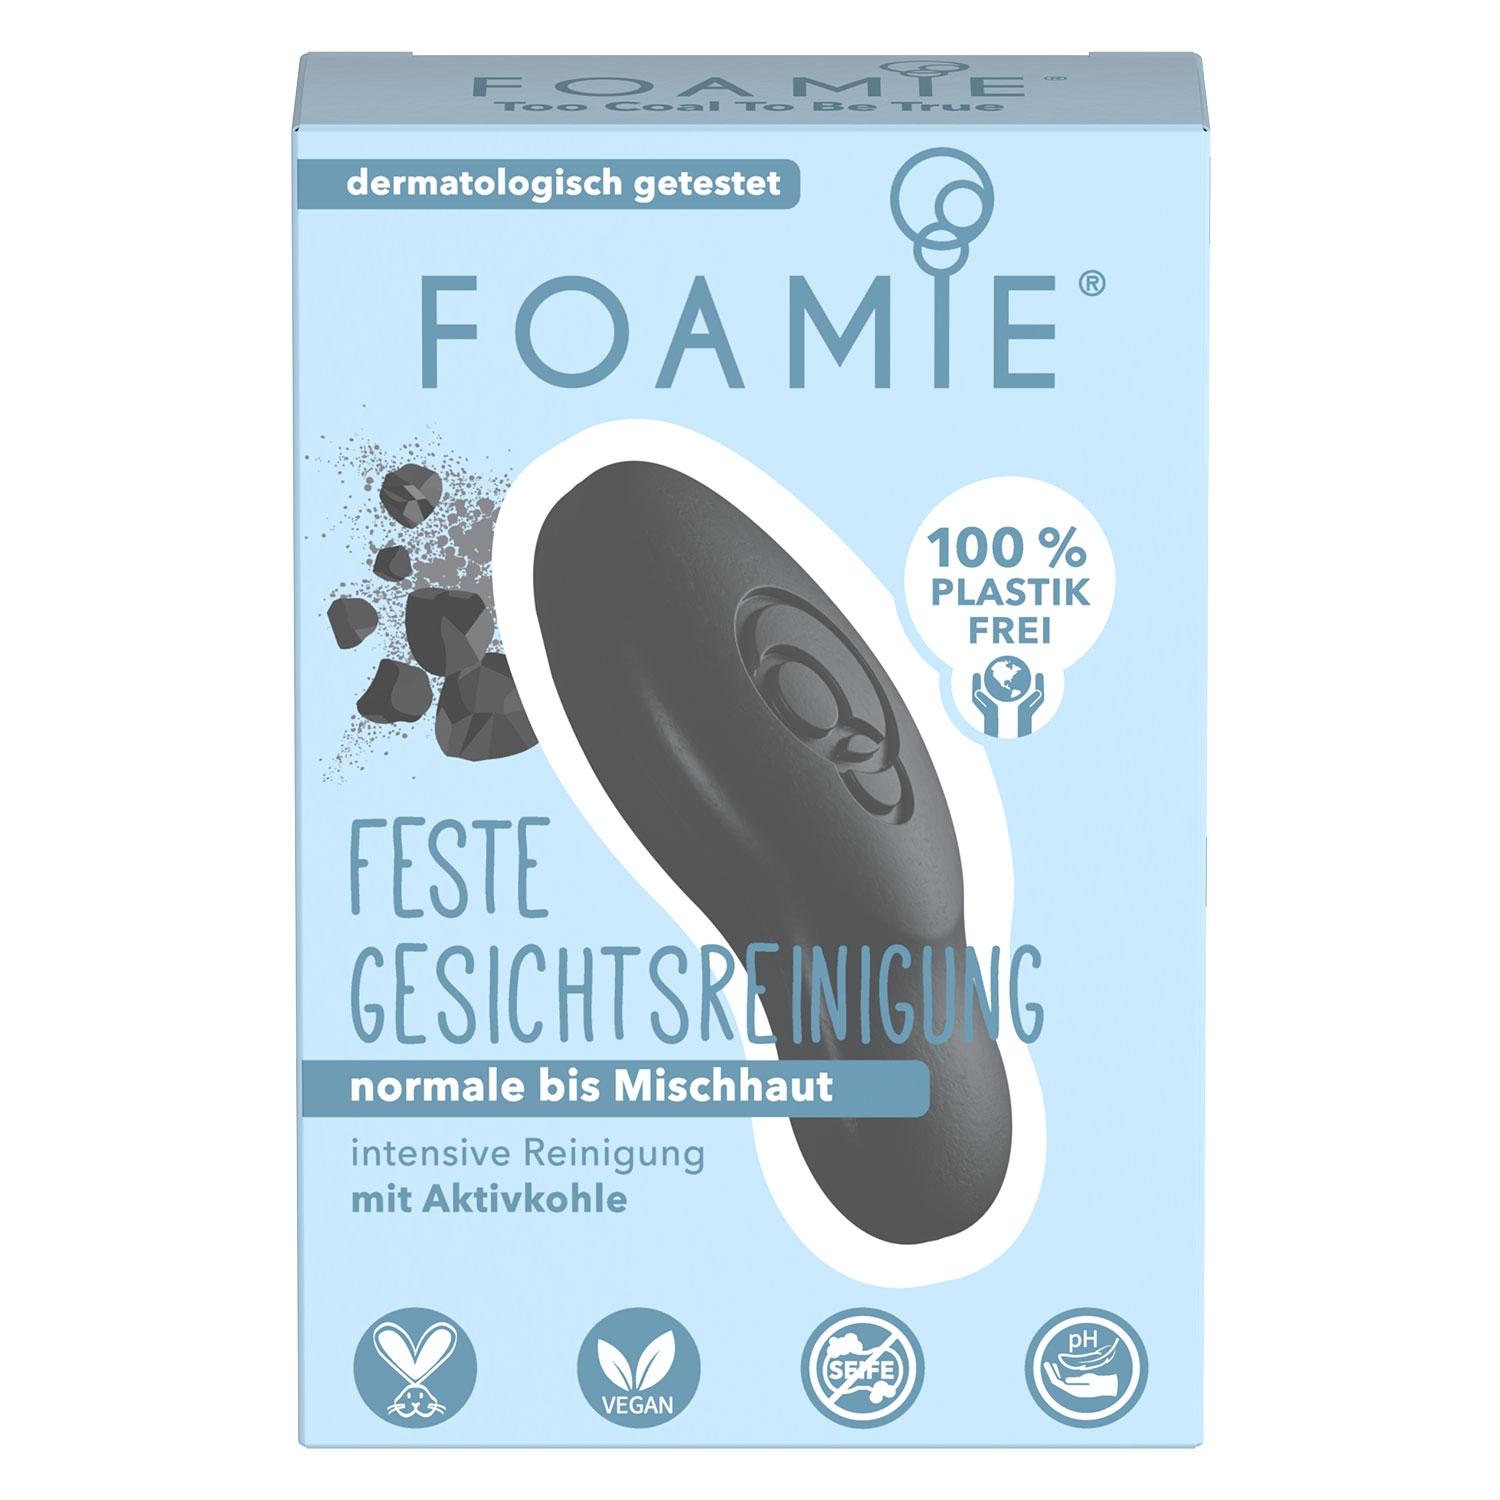 Product image from Foamie - Feste Gesichtsreinigung Too Coal To Be True